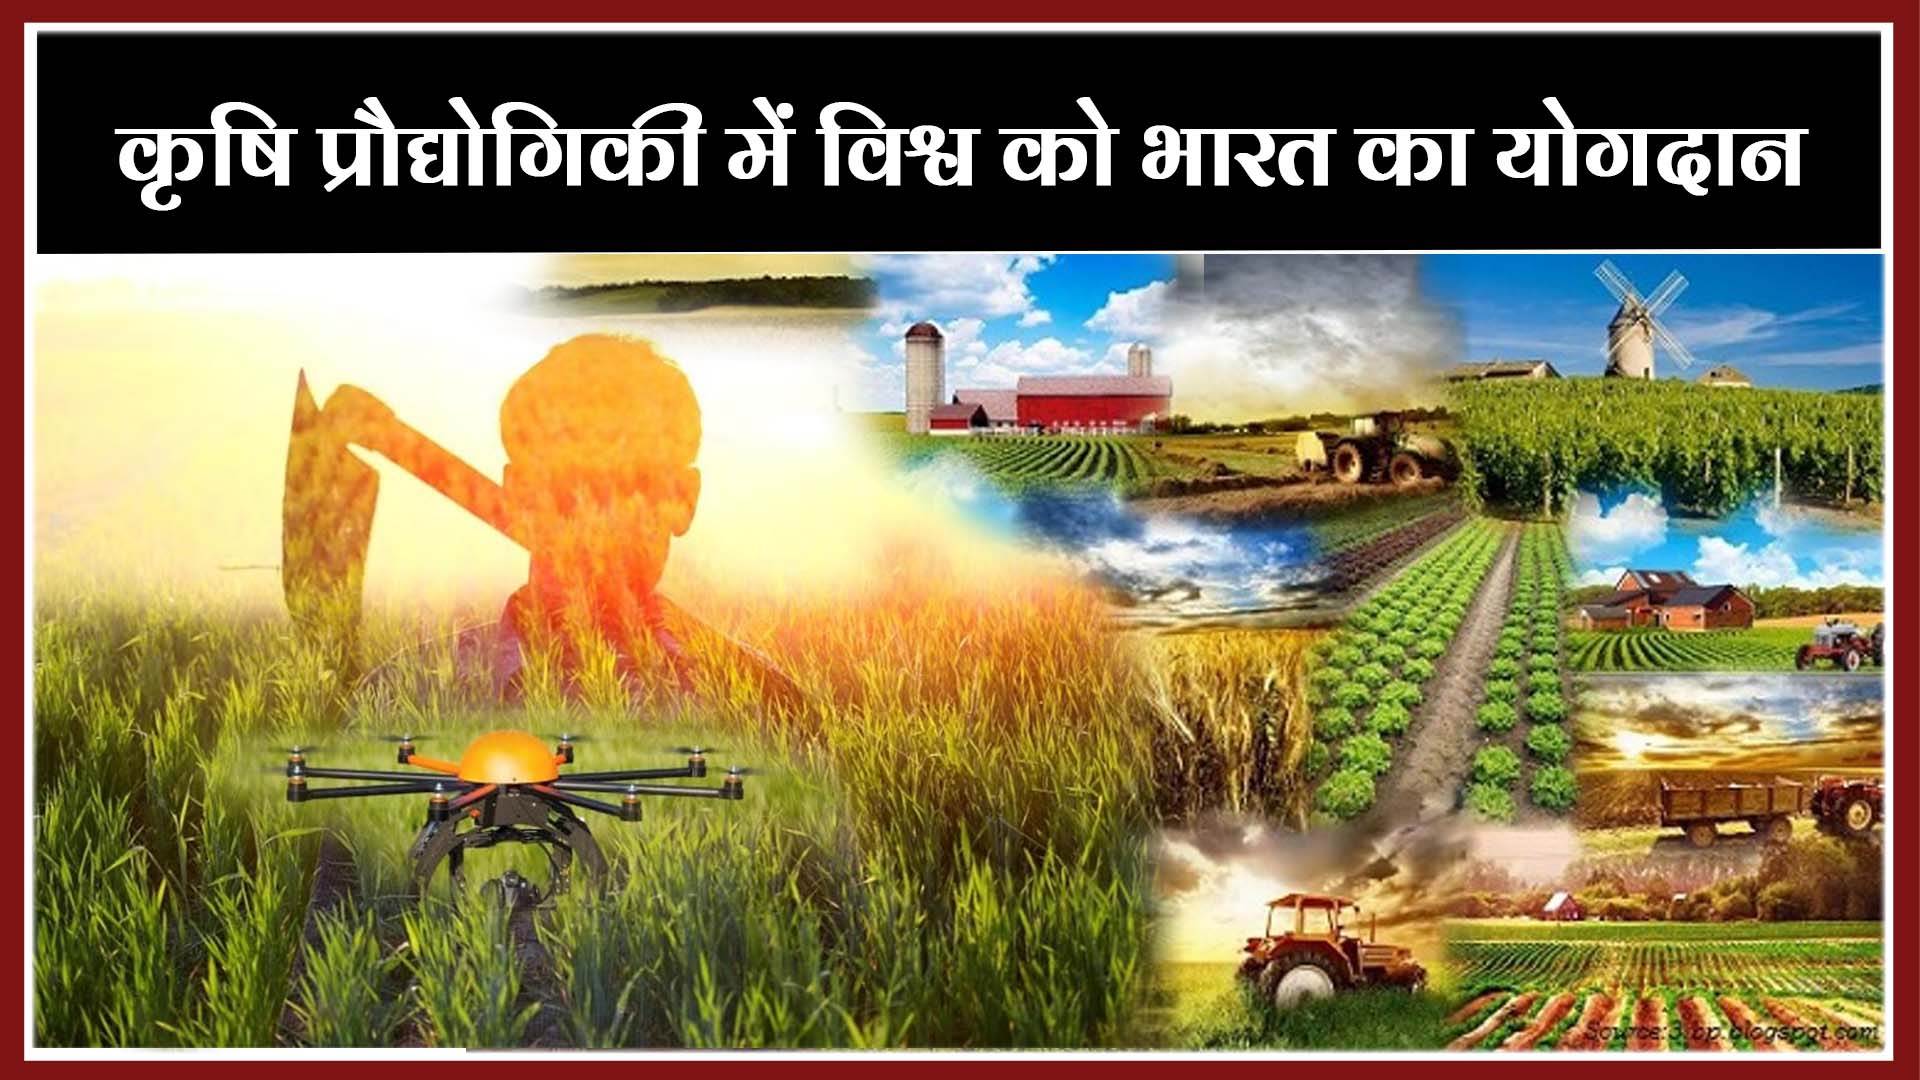 Contribution of Bharat to The World in Agriculture Technology